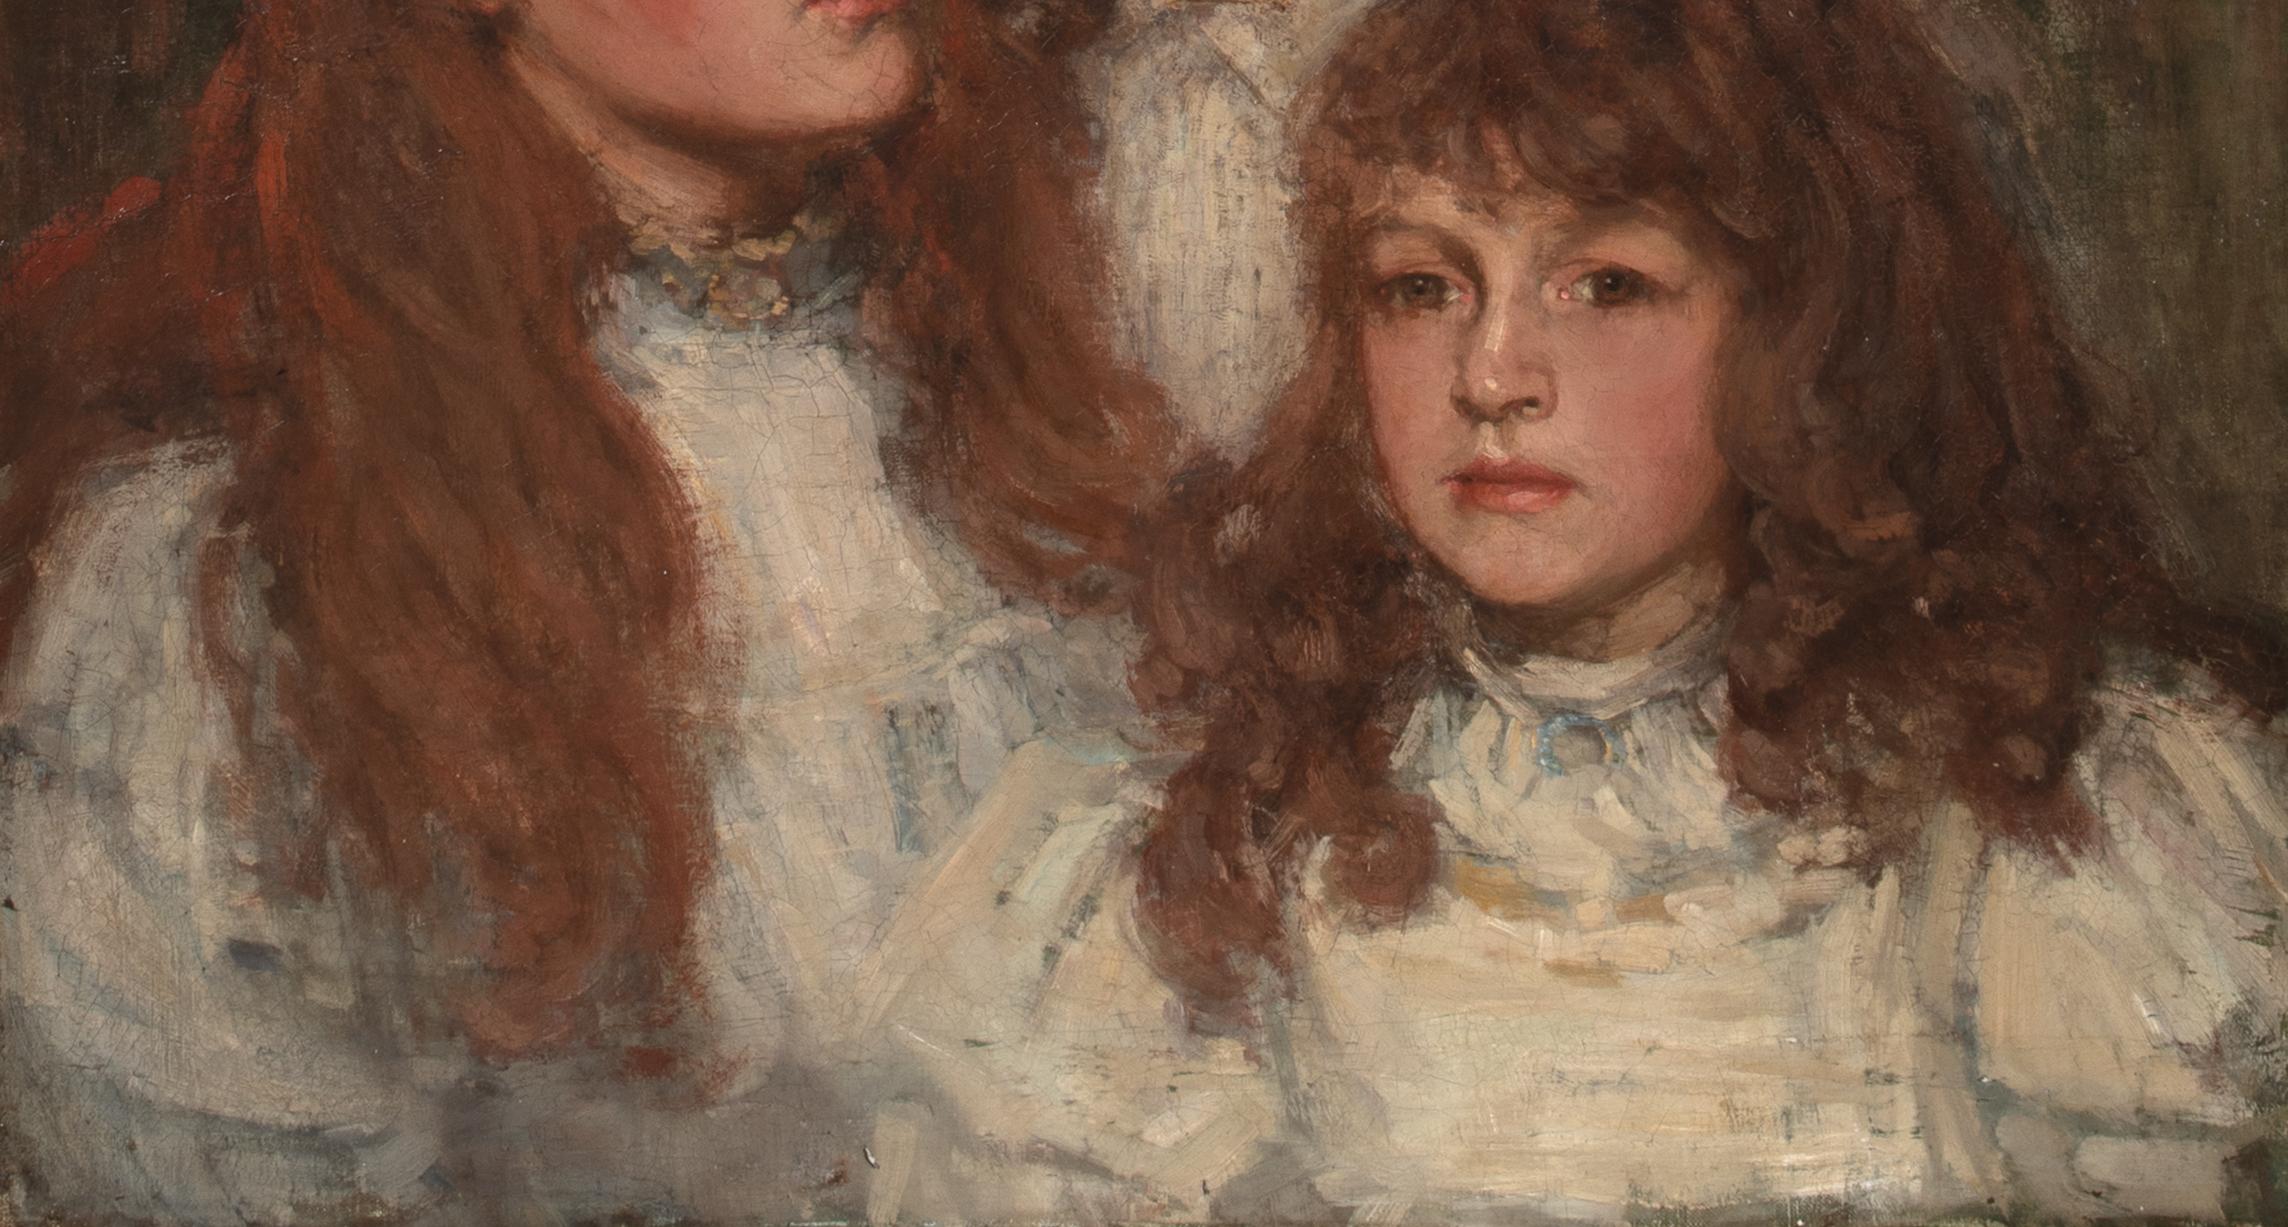 Portrait Of The Guinness Sisters, dated 1894

circle of James Abbott McNeill Whistler (1834-1903)

Signed with a rose symbol

Large 19th Century Irish portrait of The Guinness Sisters, oil on canvas signed with a rose symbol. Beautiful portrait of